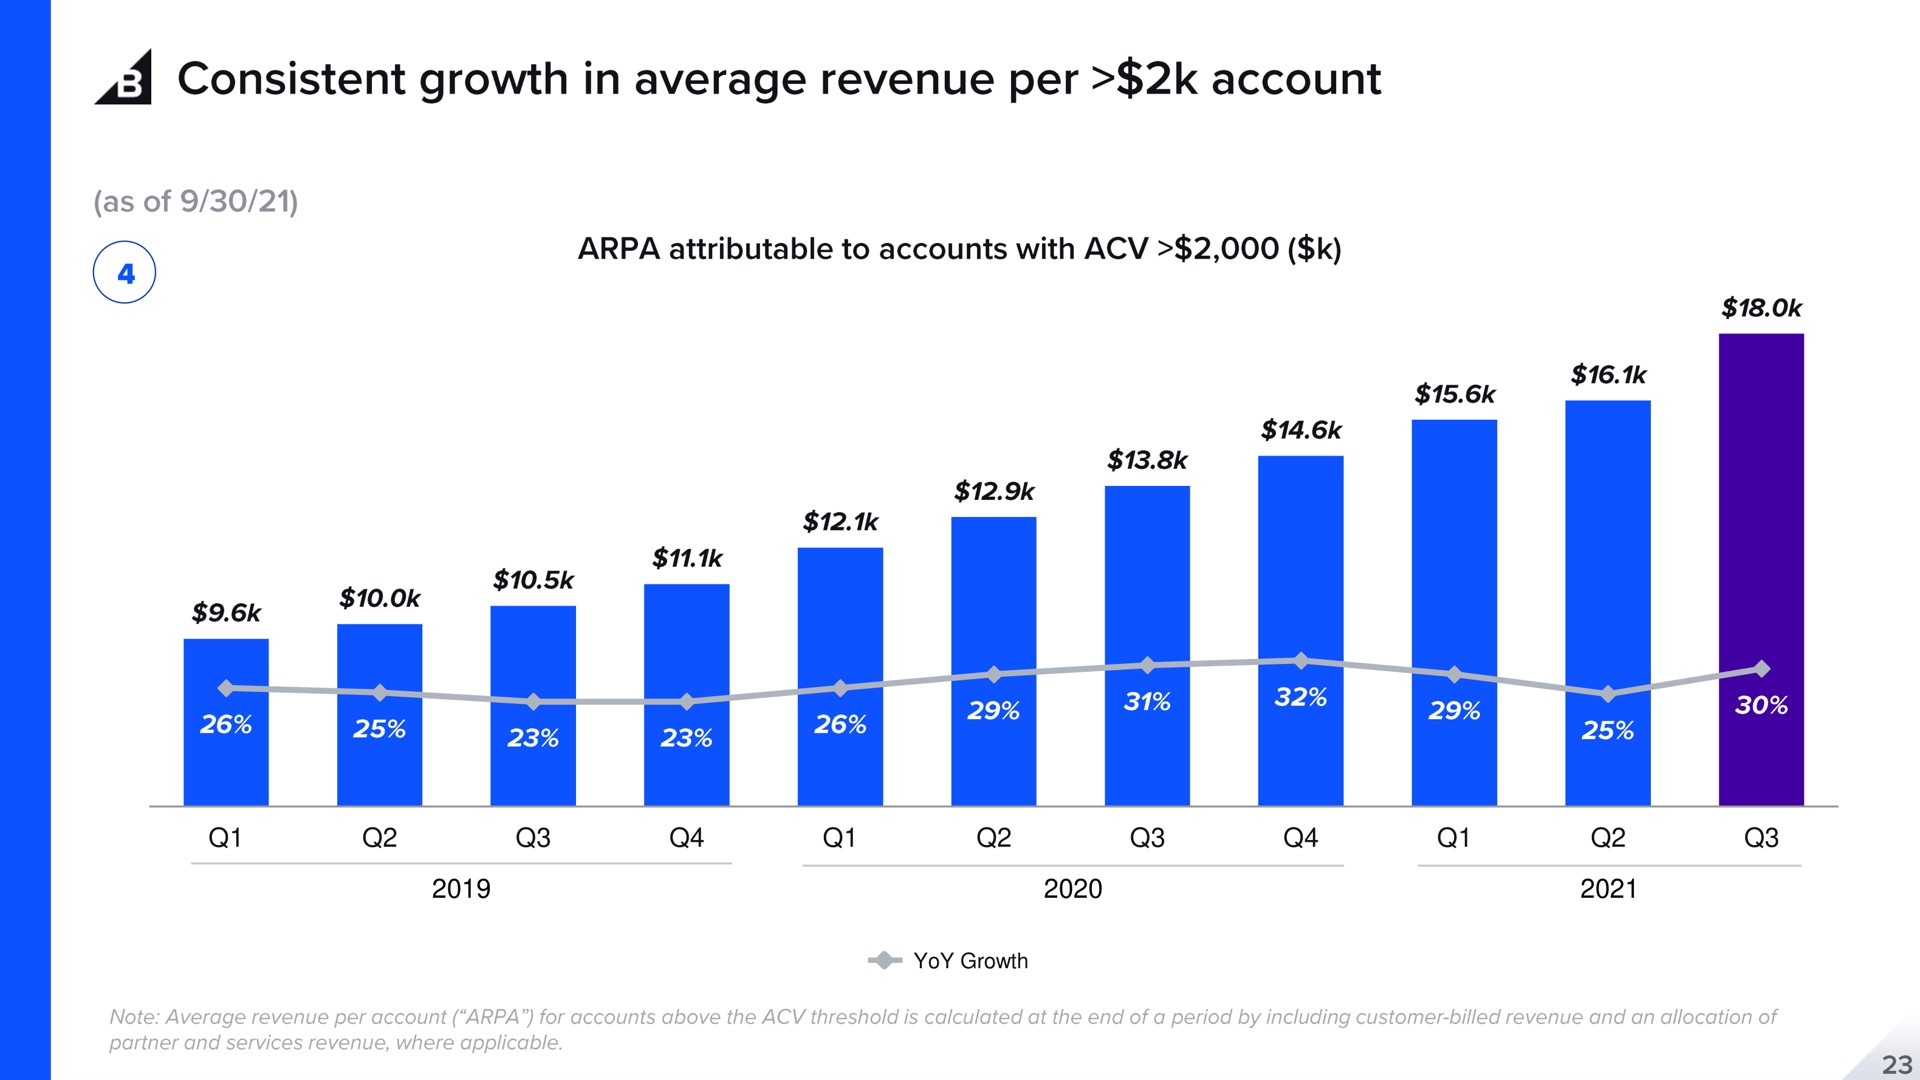 yoy growth a consistent in average revenue per account | BigCommerce